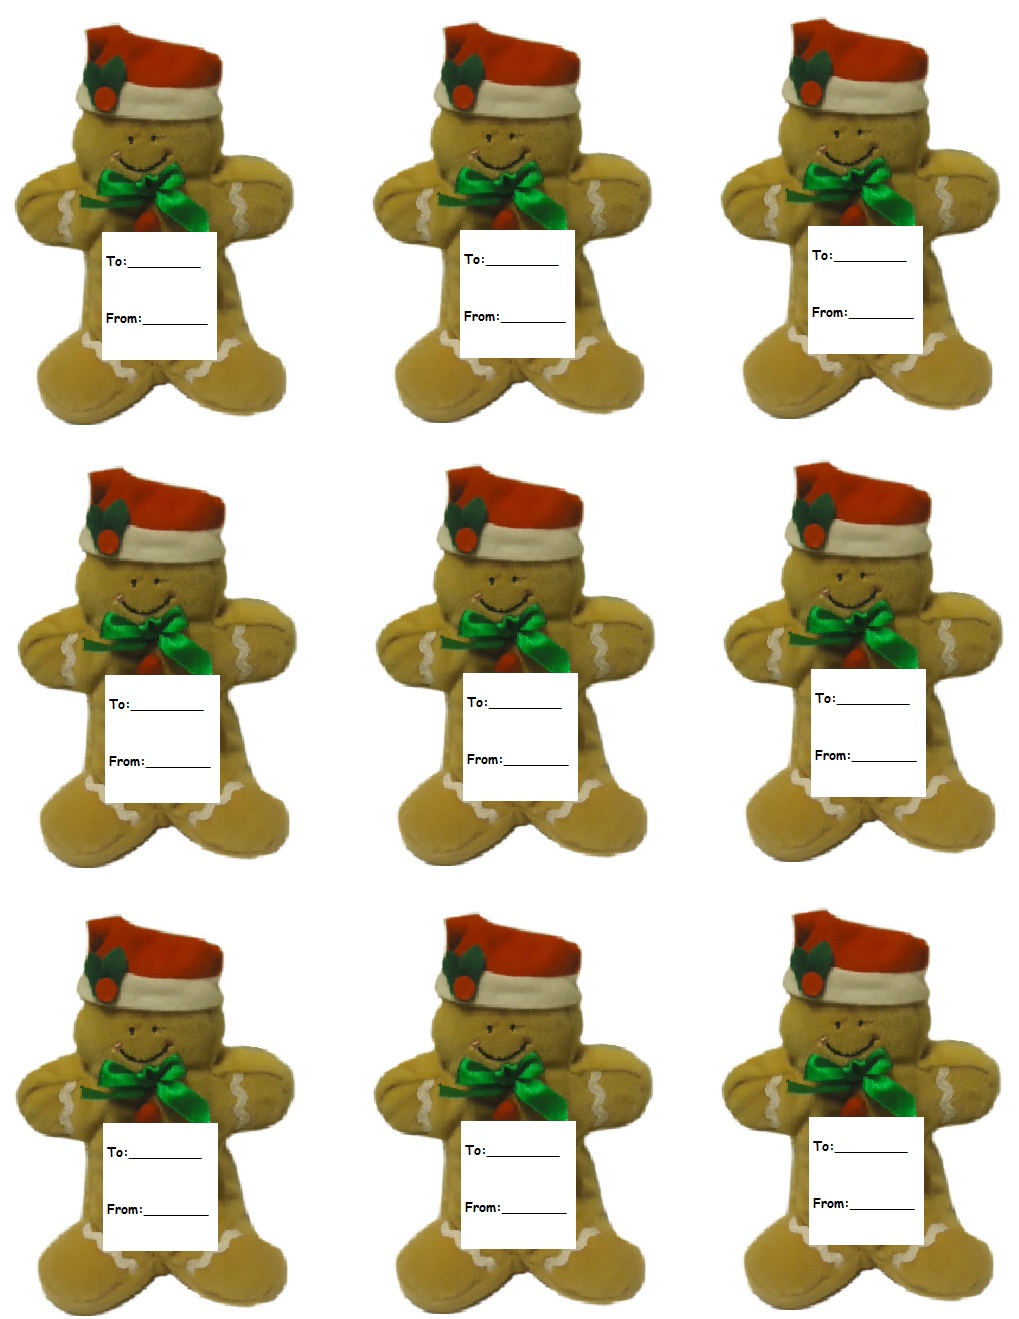 Free Gingerbread Gift Tags For Christmas Presents by Church House Collection- Free Printable Gingerbread Cutout Templates